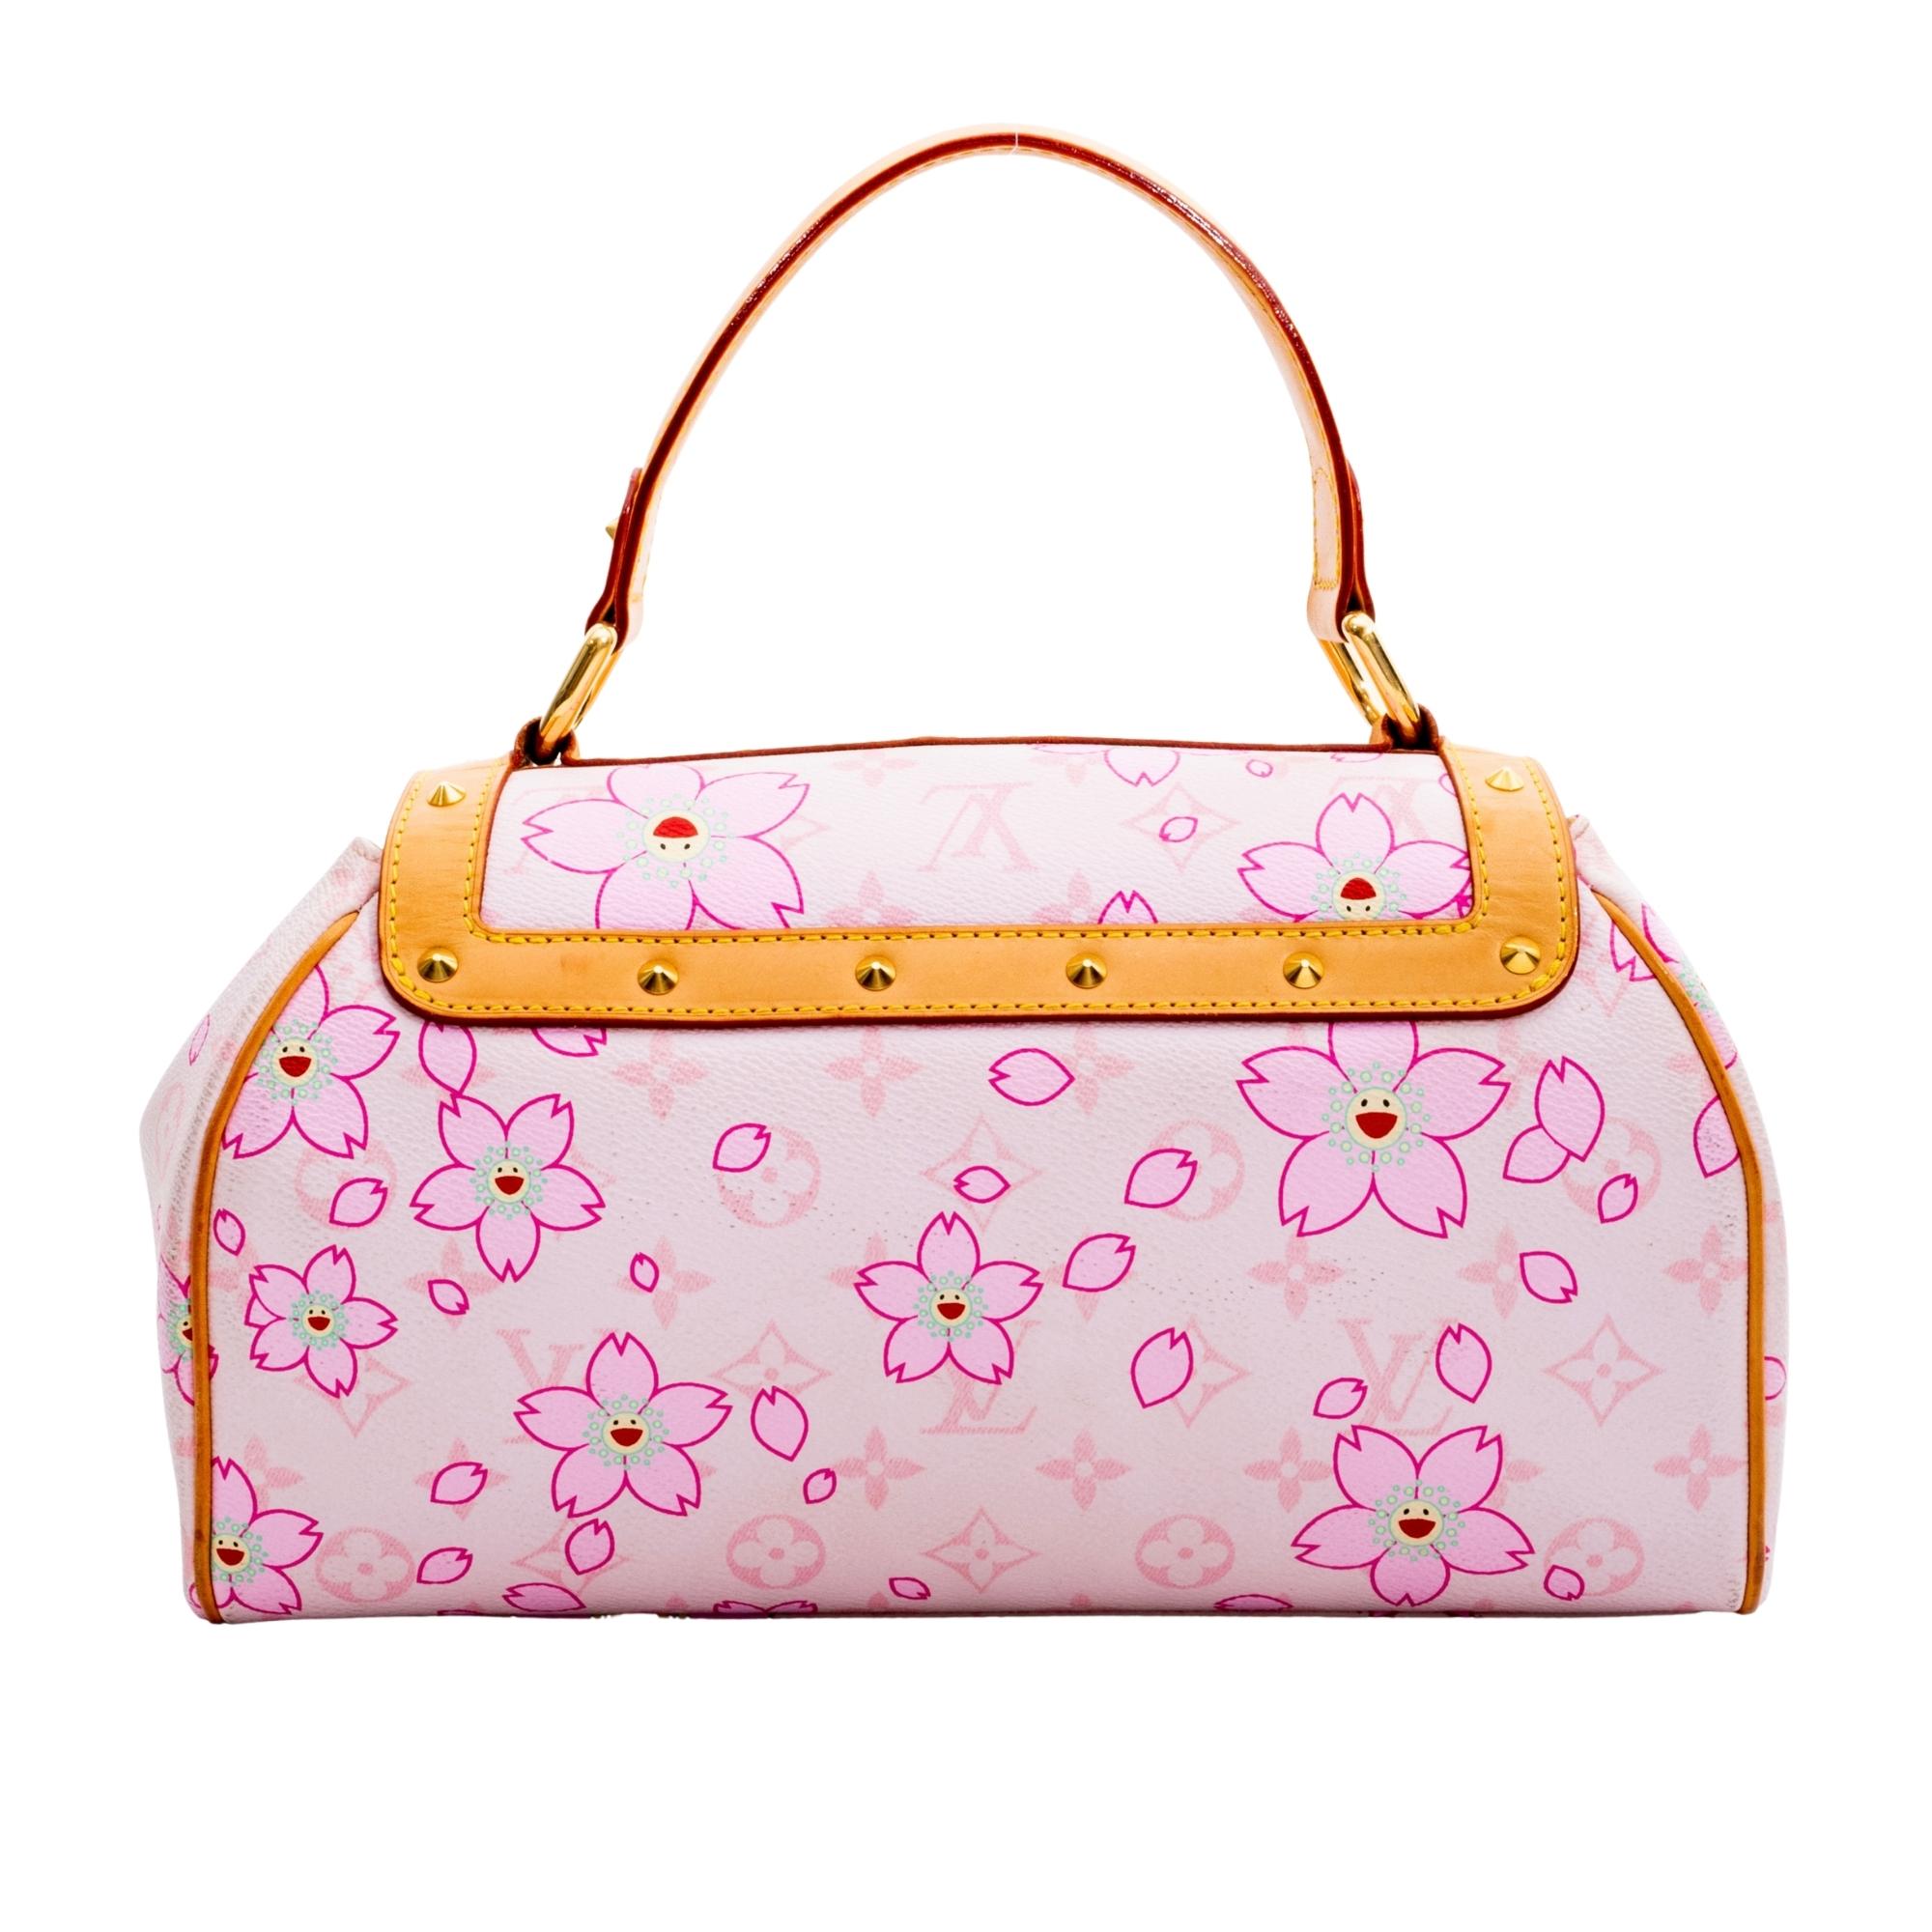 From the Takashi Murakami Collection. This is a pink tonal monogram coated canvas Louis Vuitton Cherry Blossom Sac Retro with brass hardware, tan vachetta leather trim, single flat top handle, conical stud embellishments throughout, tan vachetta